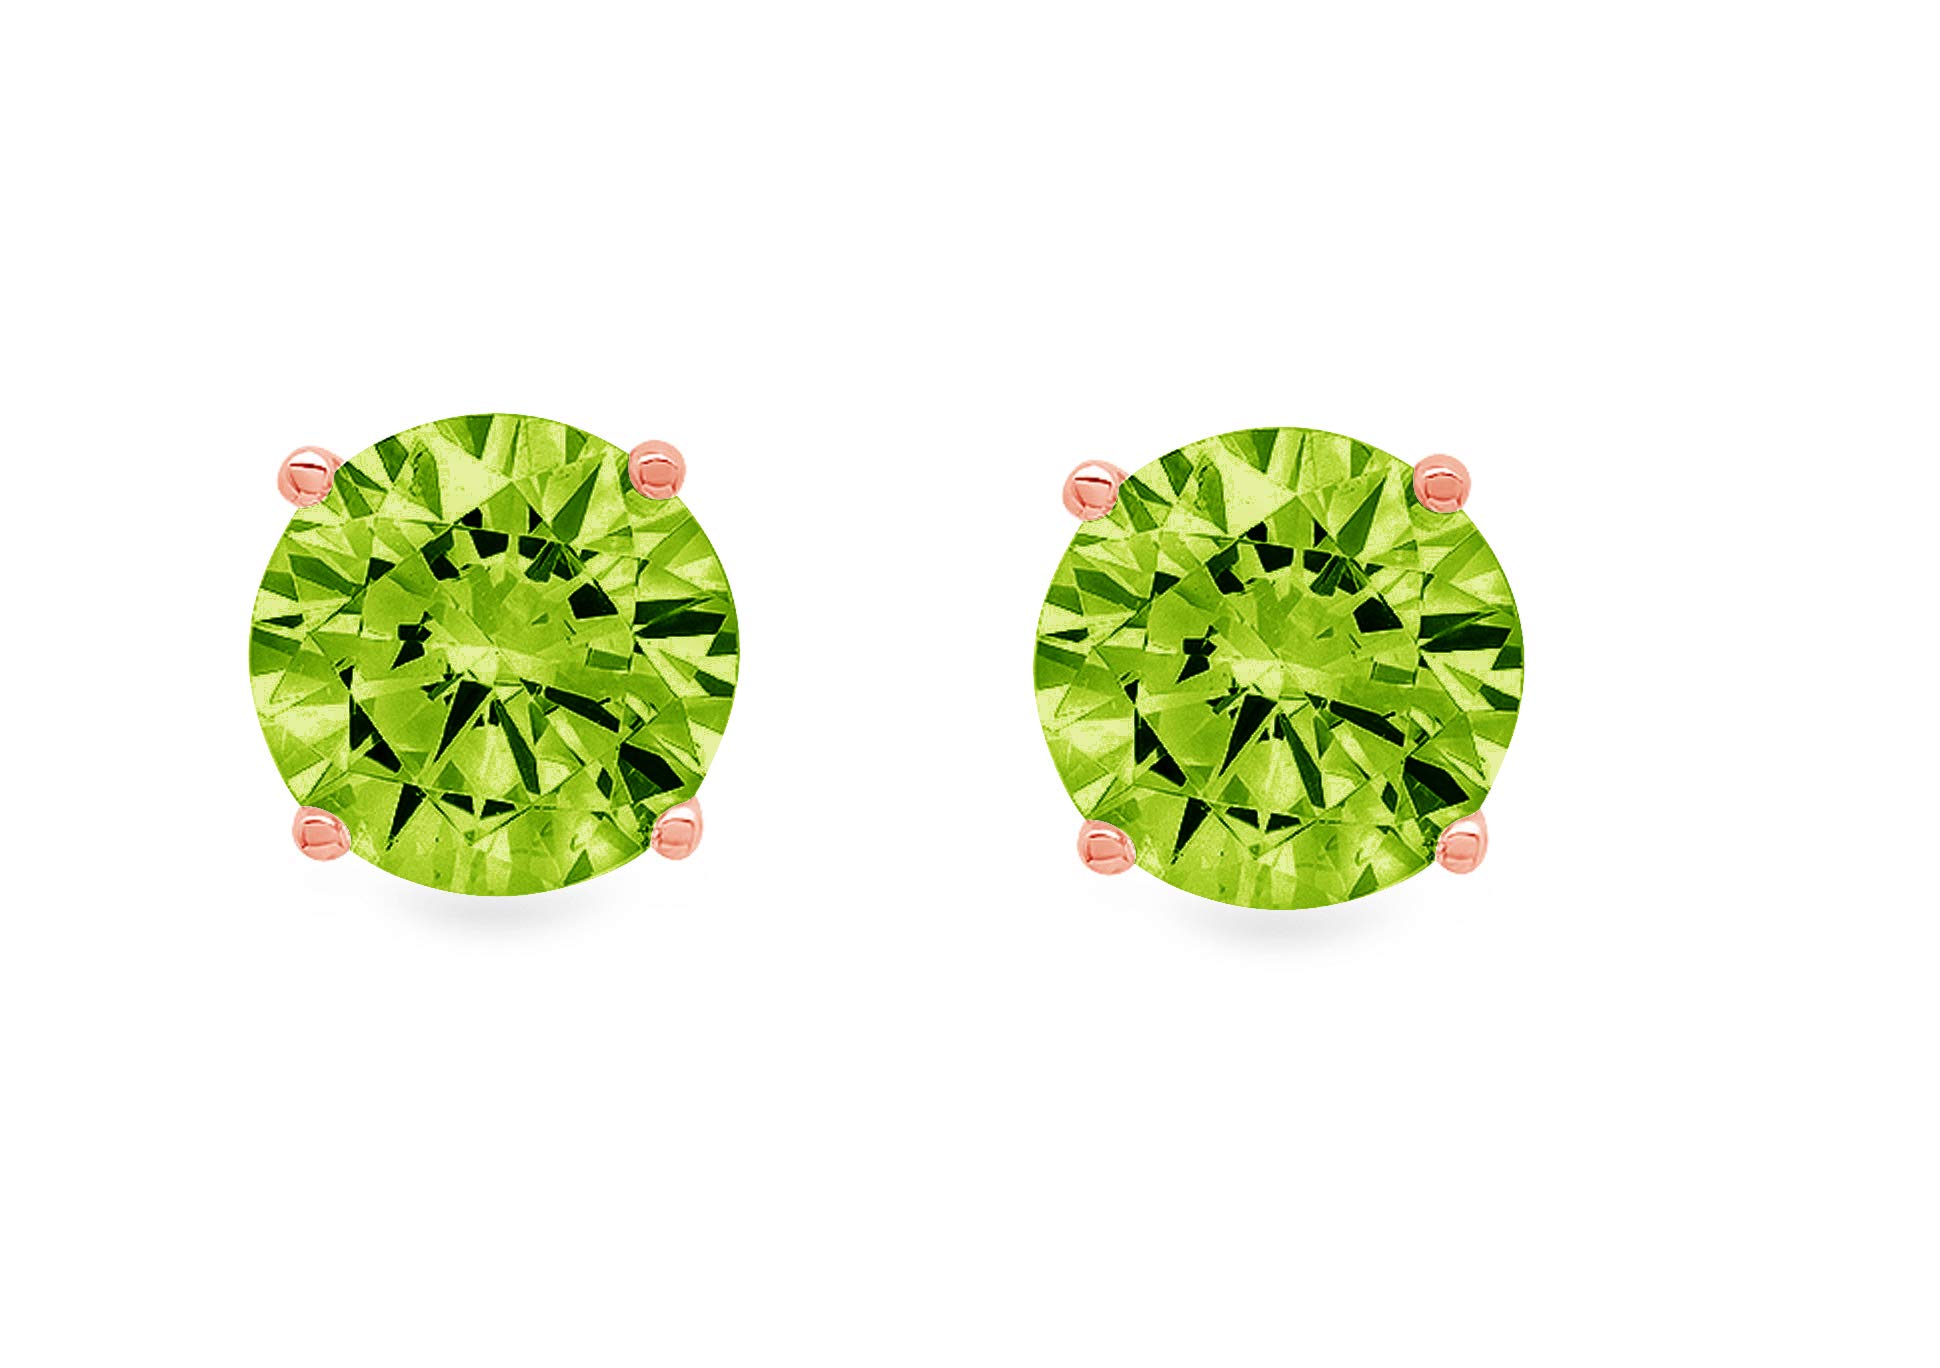 1.1ct Brilliant Round Cut Solitaire Designer Genuine Natural Light Green Peridot Gemstone Flawless pair of Stud Earrings Solid 14k Pink Rose Gold Butterfly Push Back